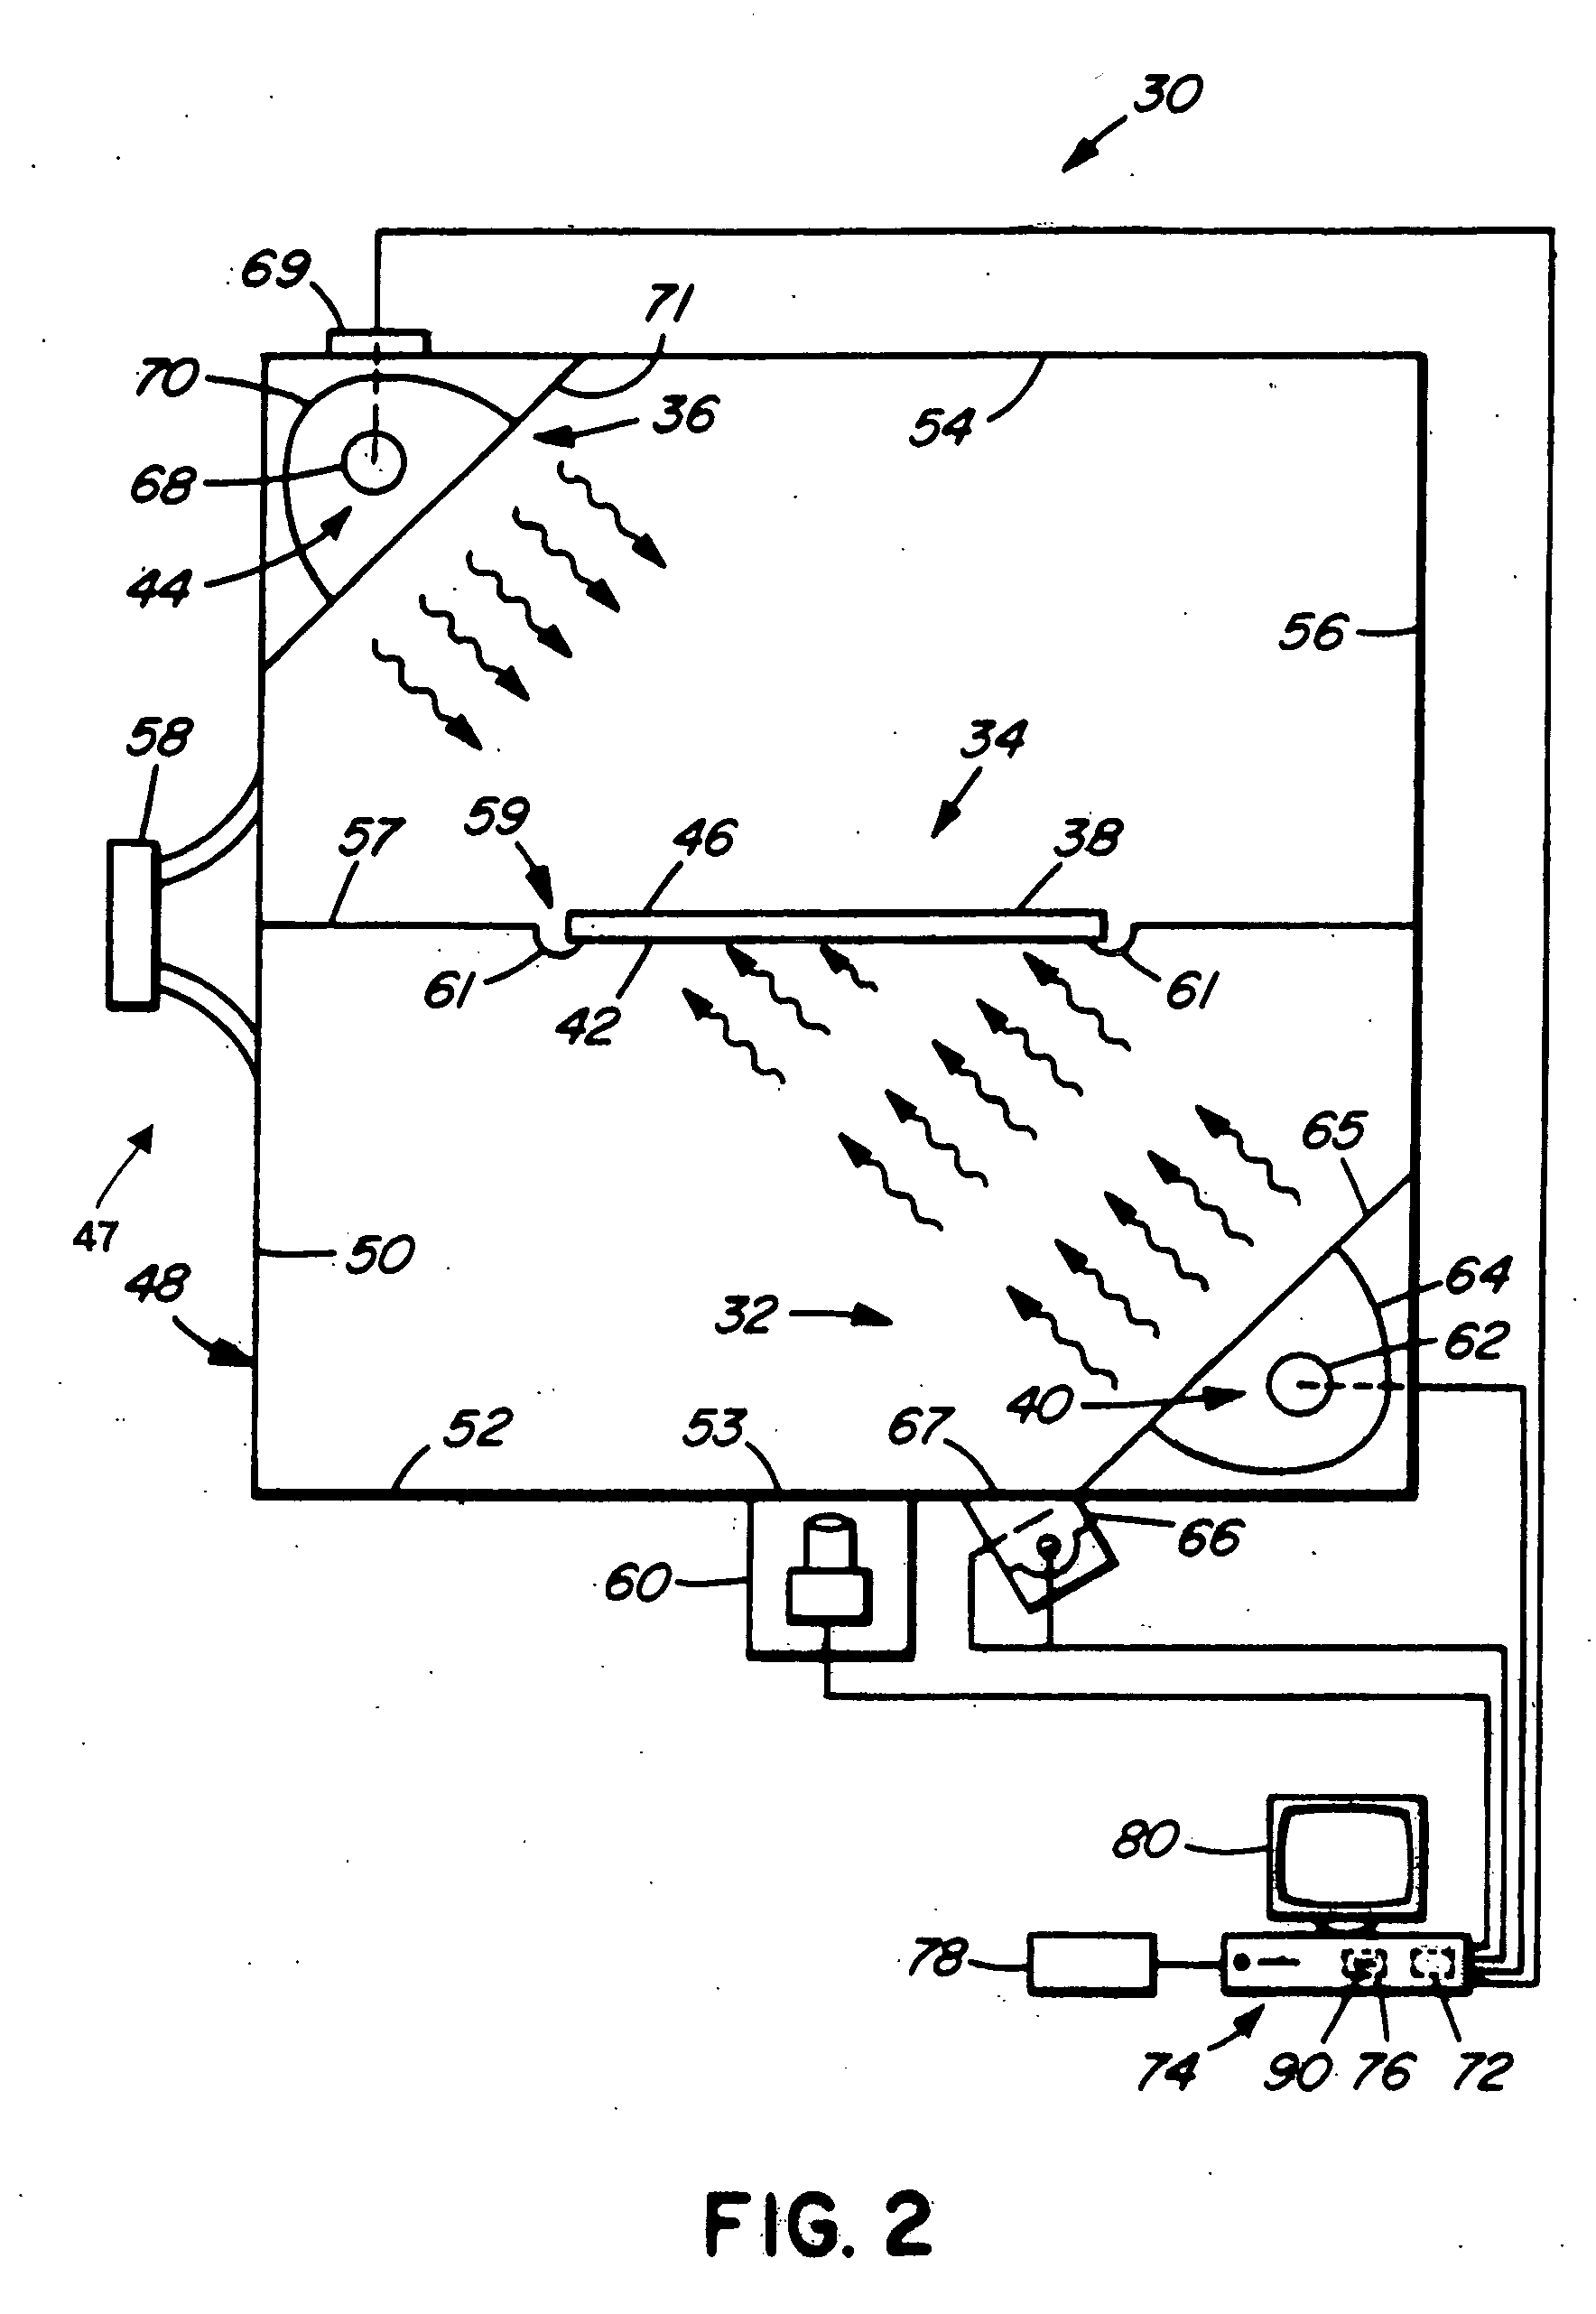 Heat-treating methods and systems